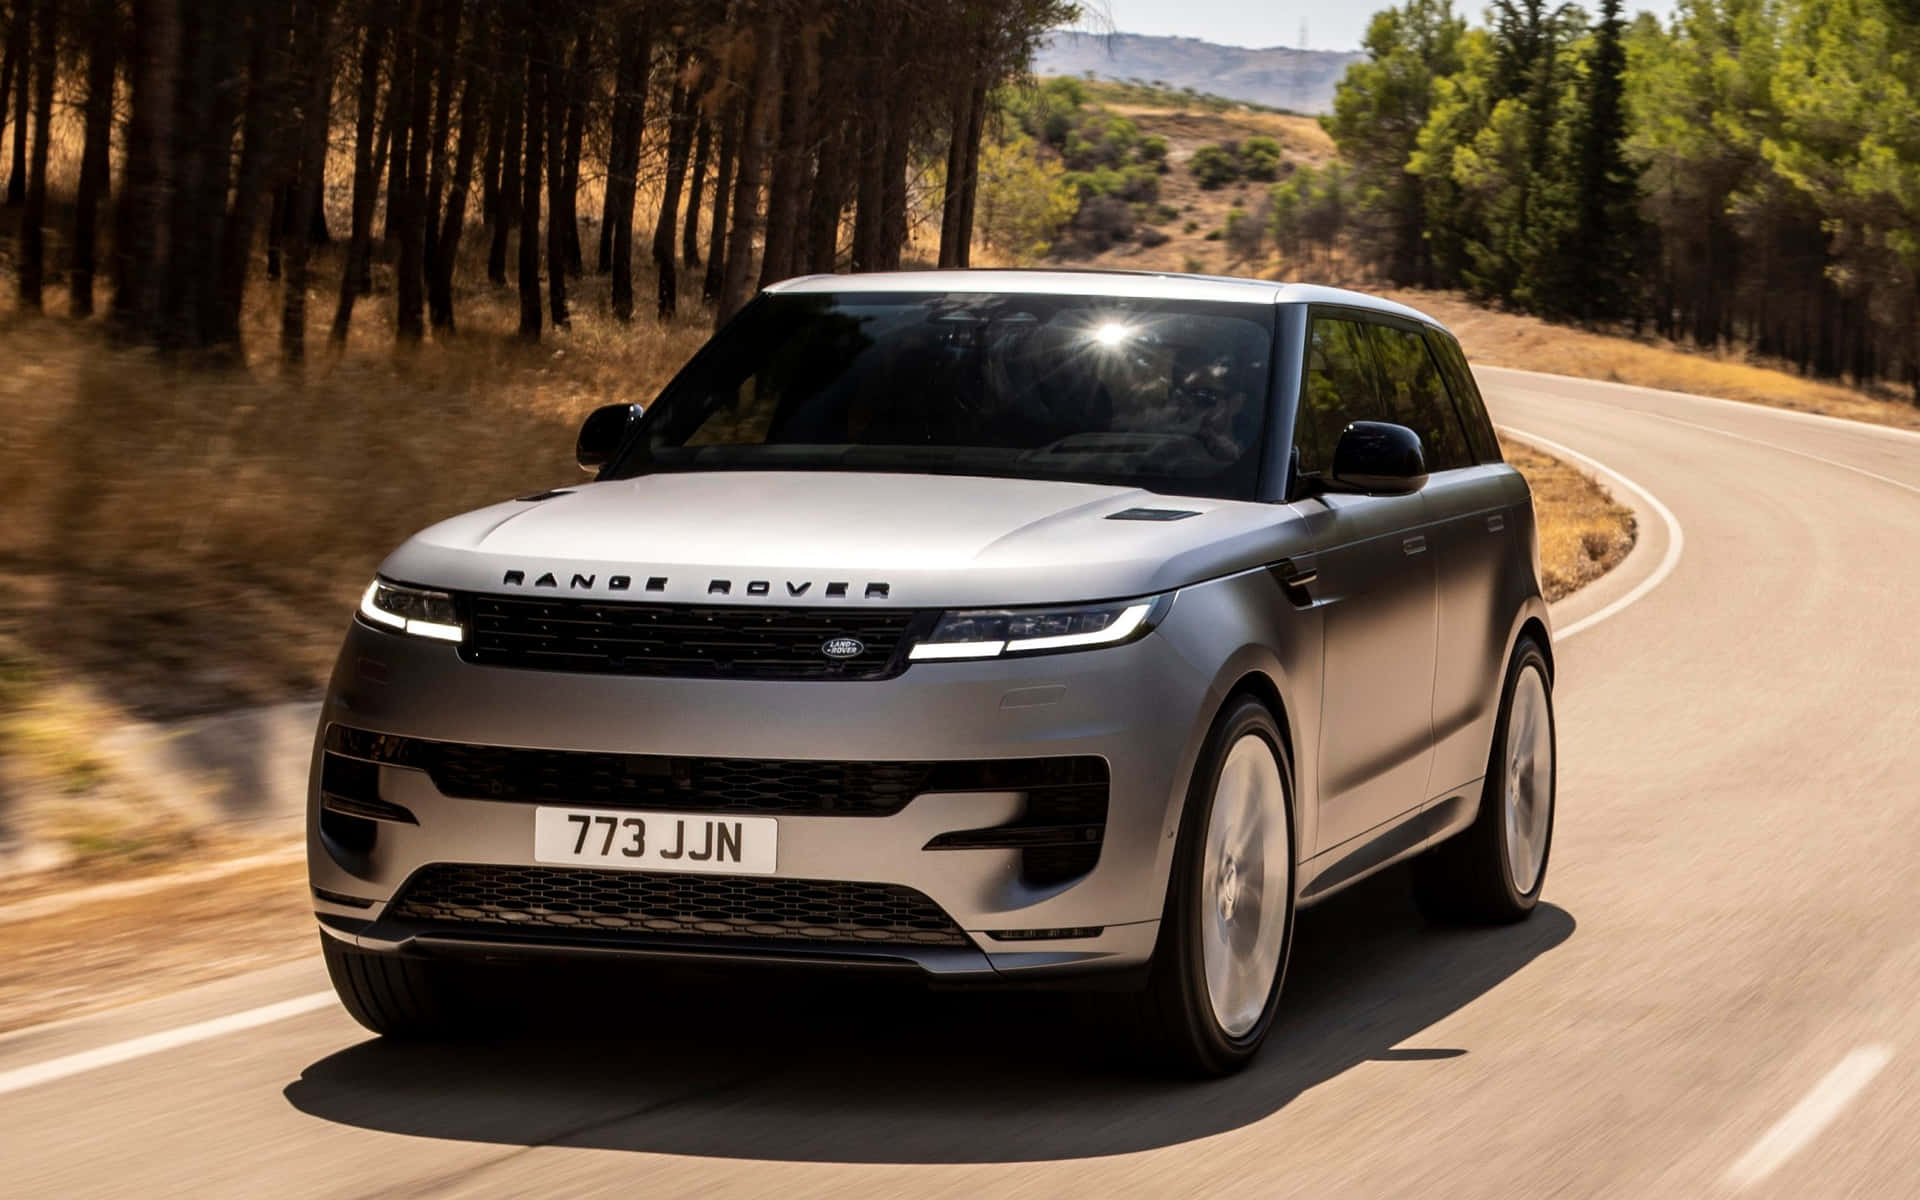 The New Land Rover Evoque Is Driving Down A Country Road